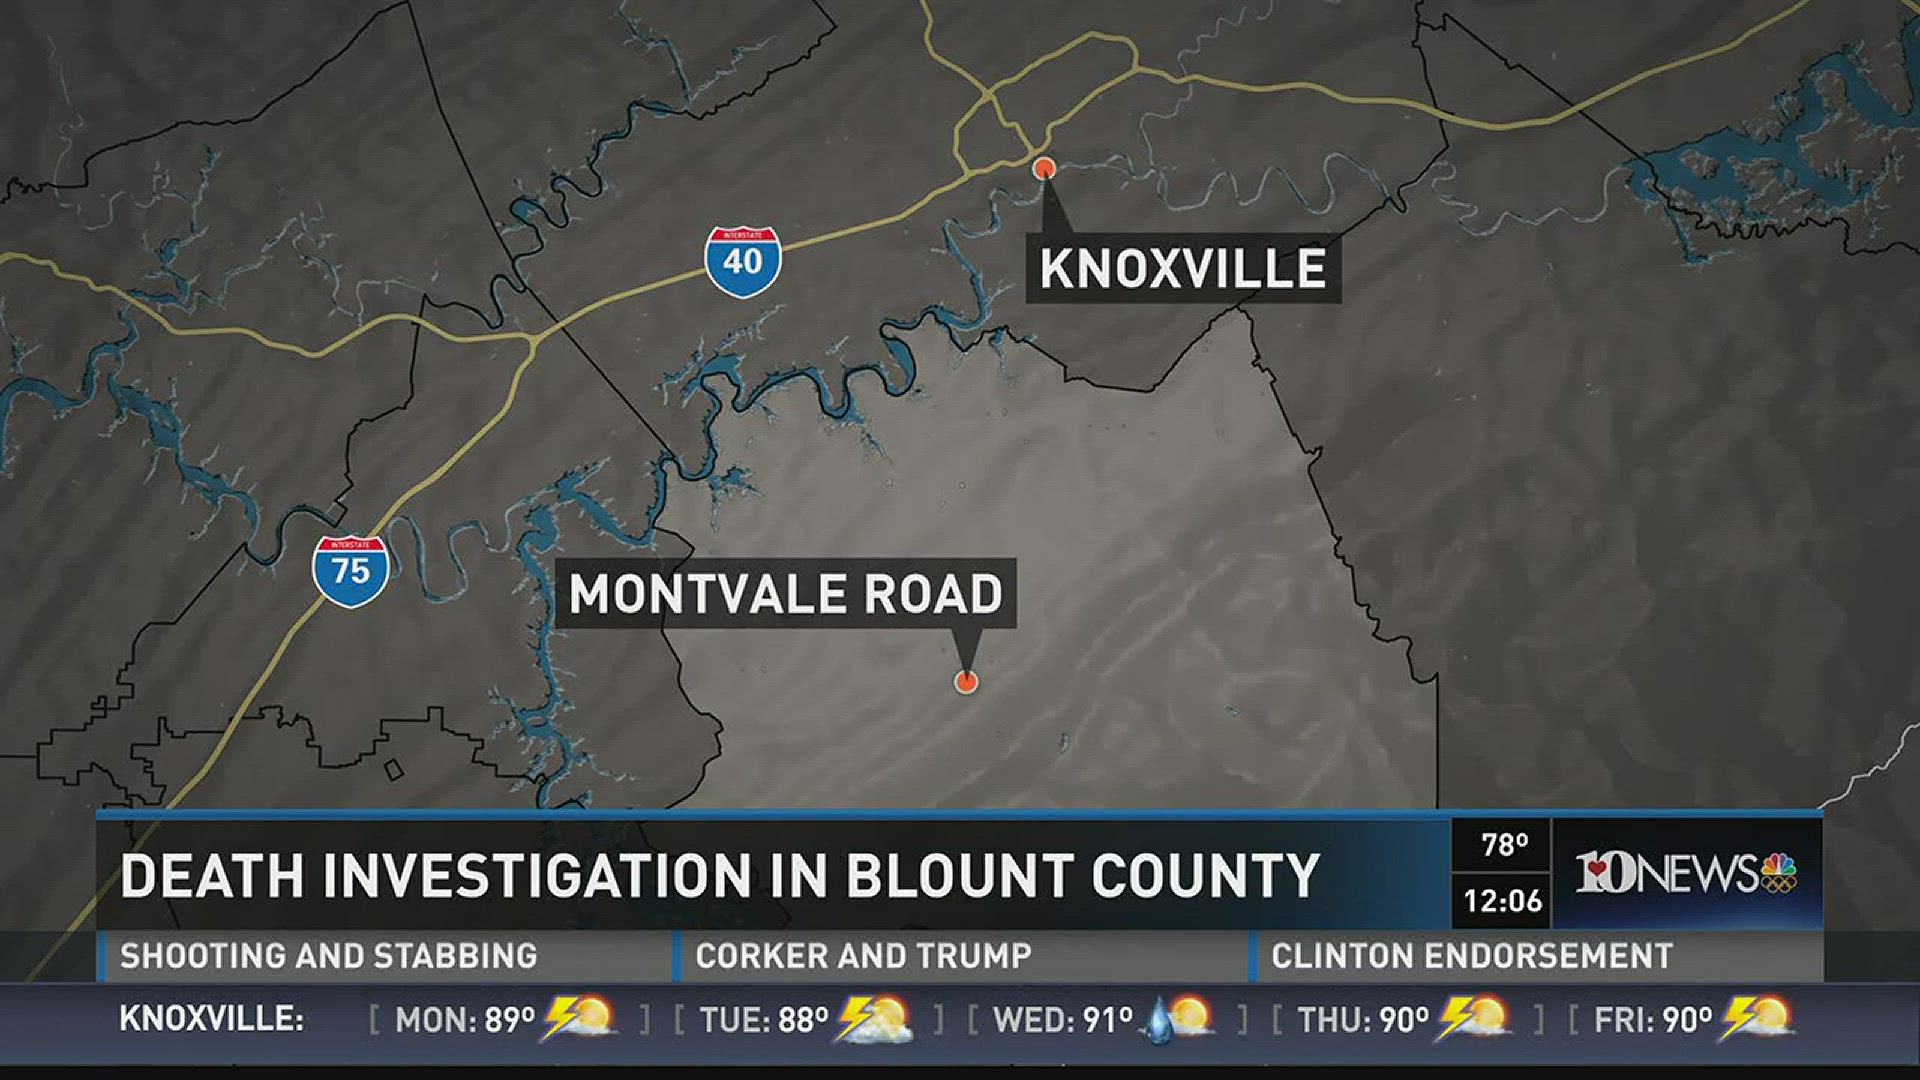 June 11, 2016 at noon: The Blount County Sheriff's Office said patrolmen found the body of a woman around 8:15 a.m. Sunday in an apartment off Montvale Road.